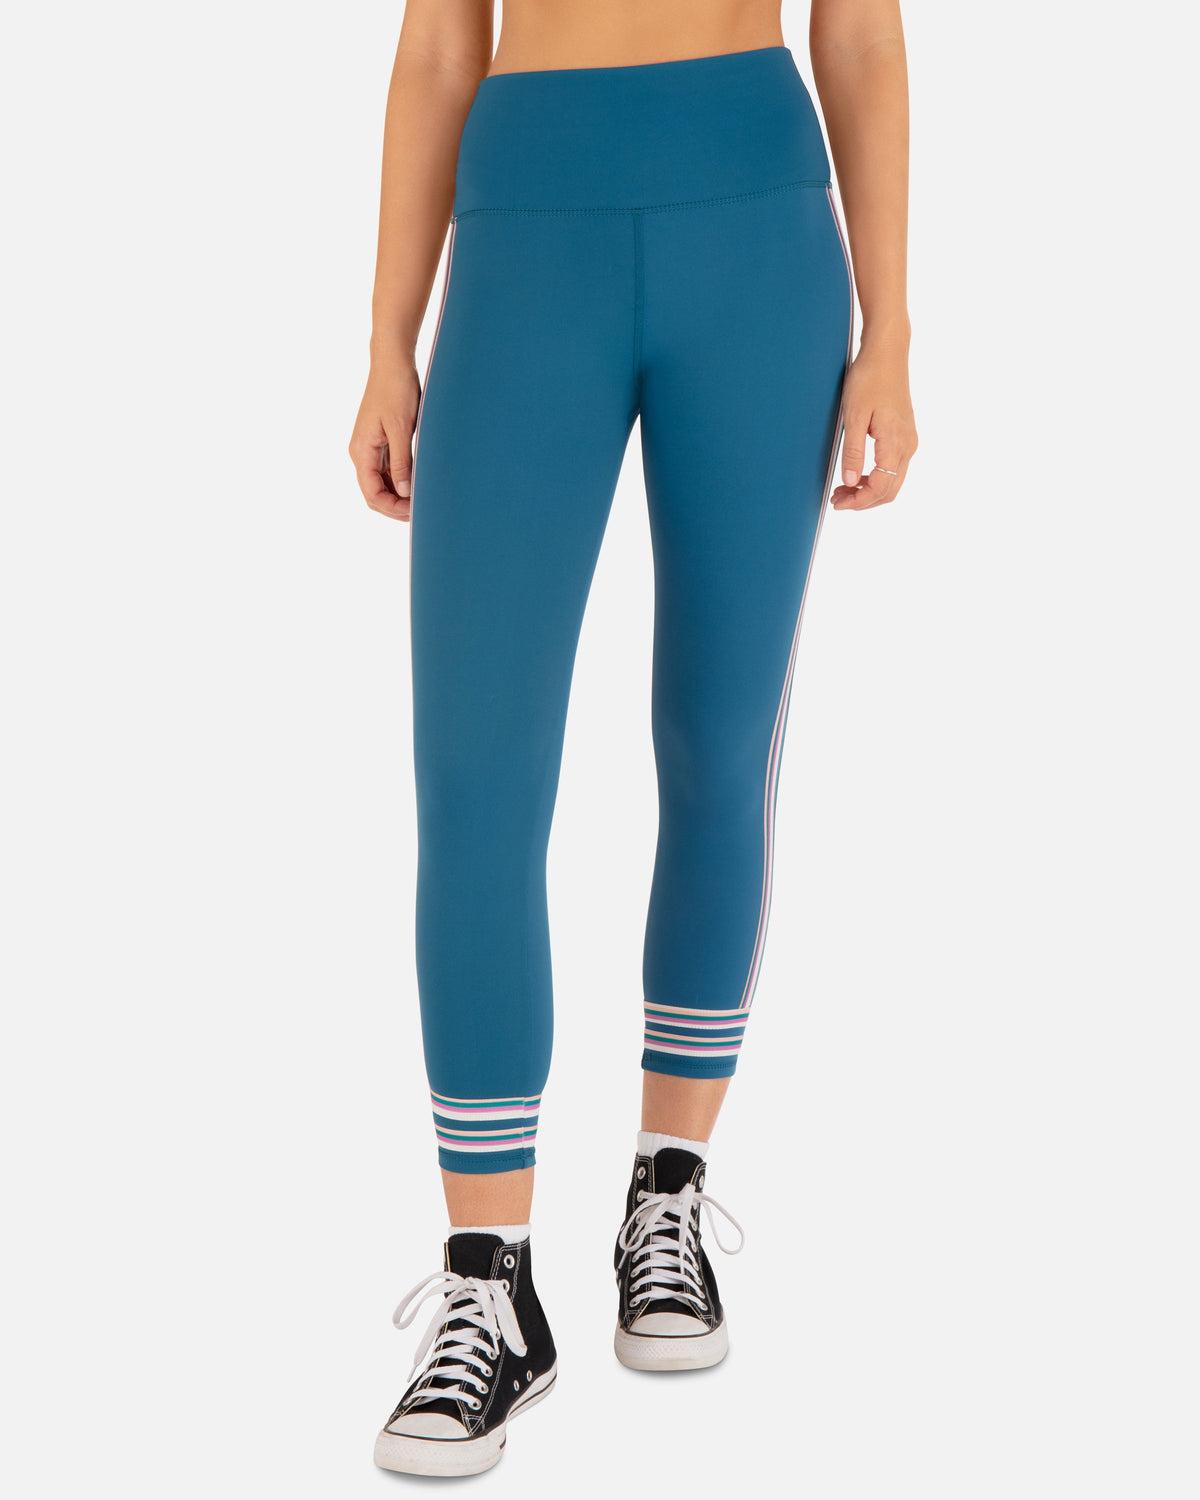 Women's Workout Clothes & Activewear